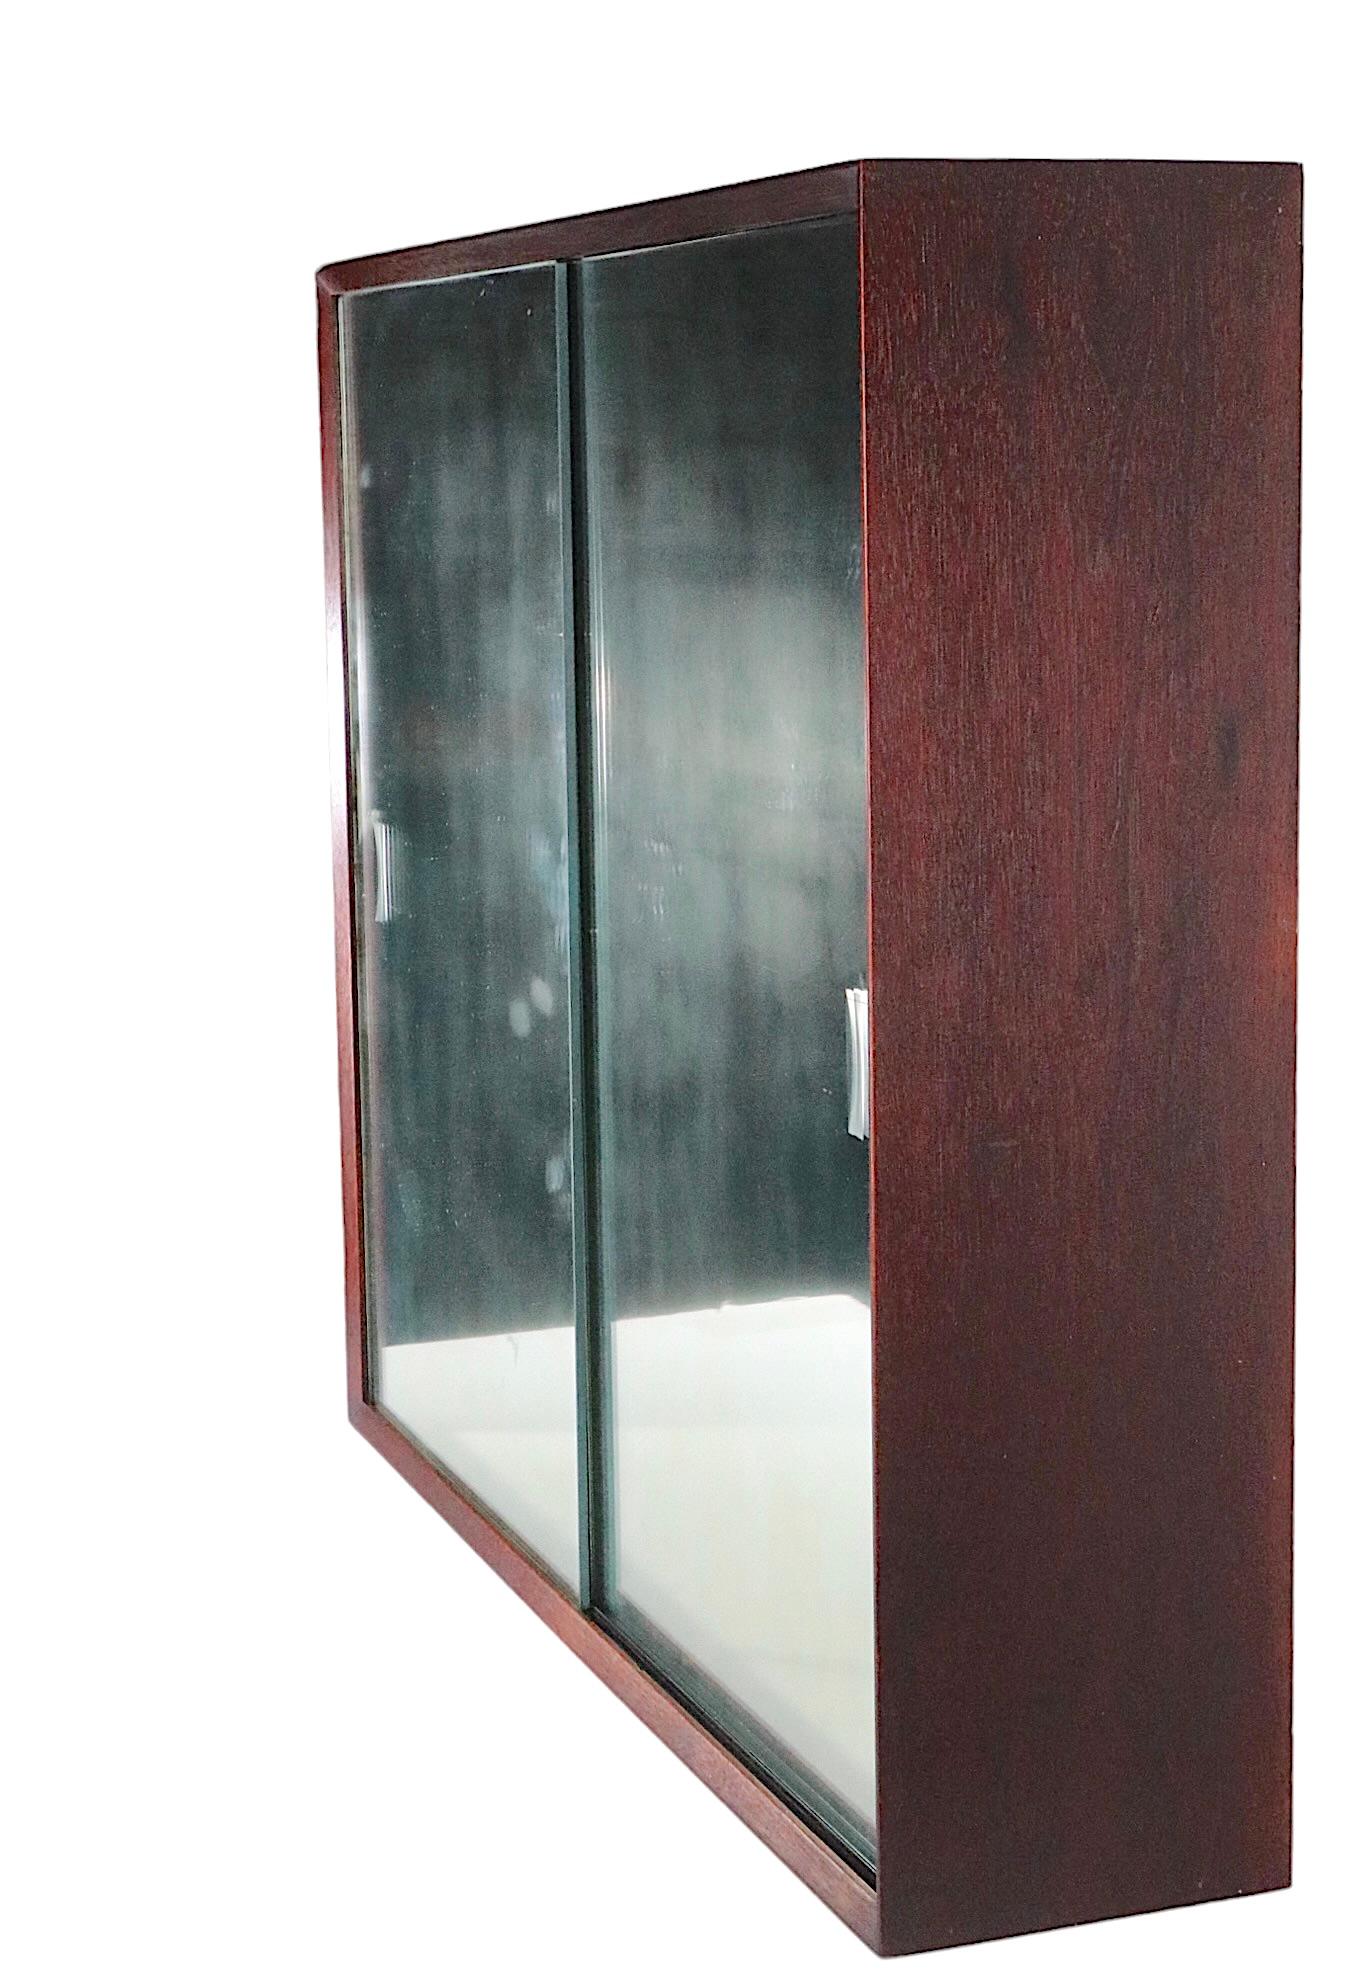 Danish Mid Century Wall Hanging Cabinet with Sliding Mirrored Doors, circa 1950s For Sale 10